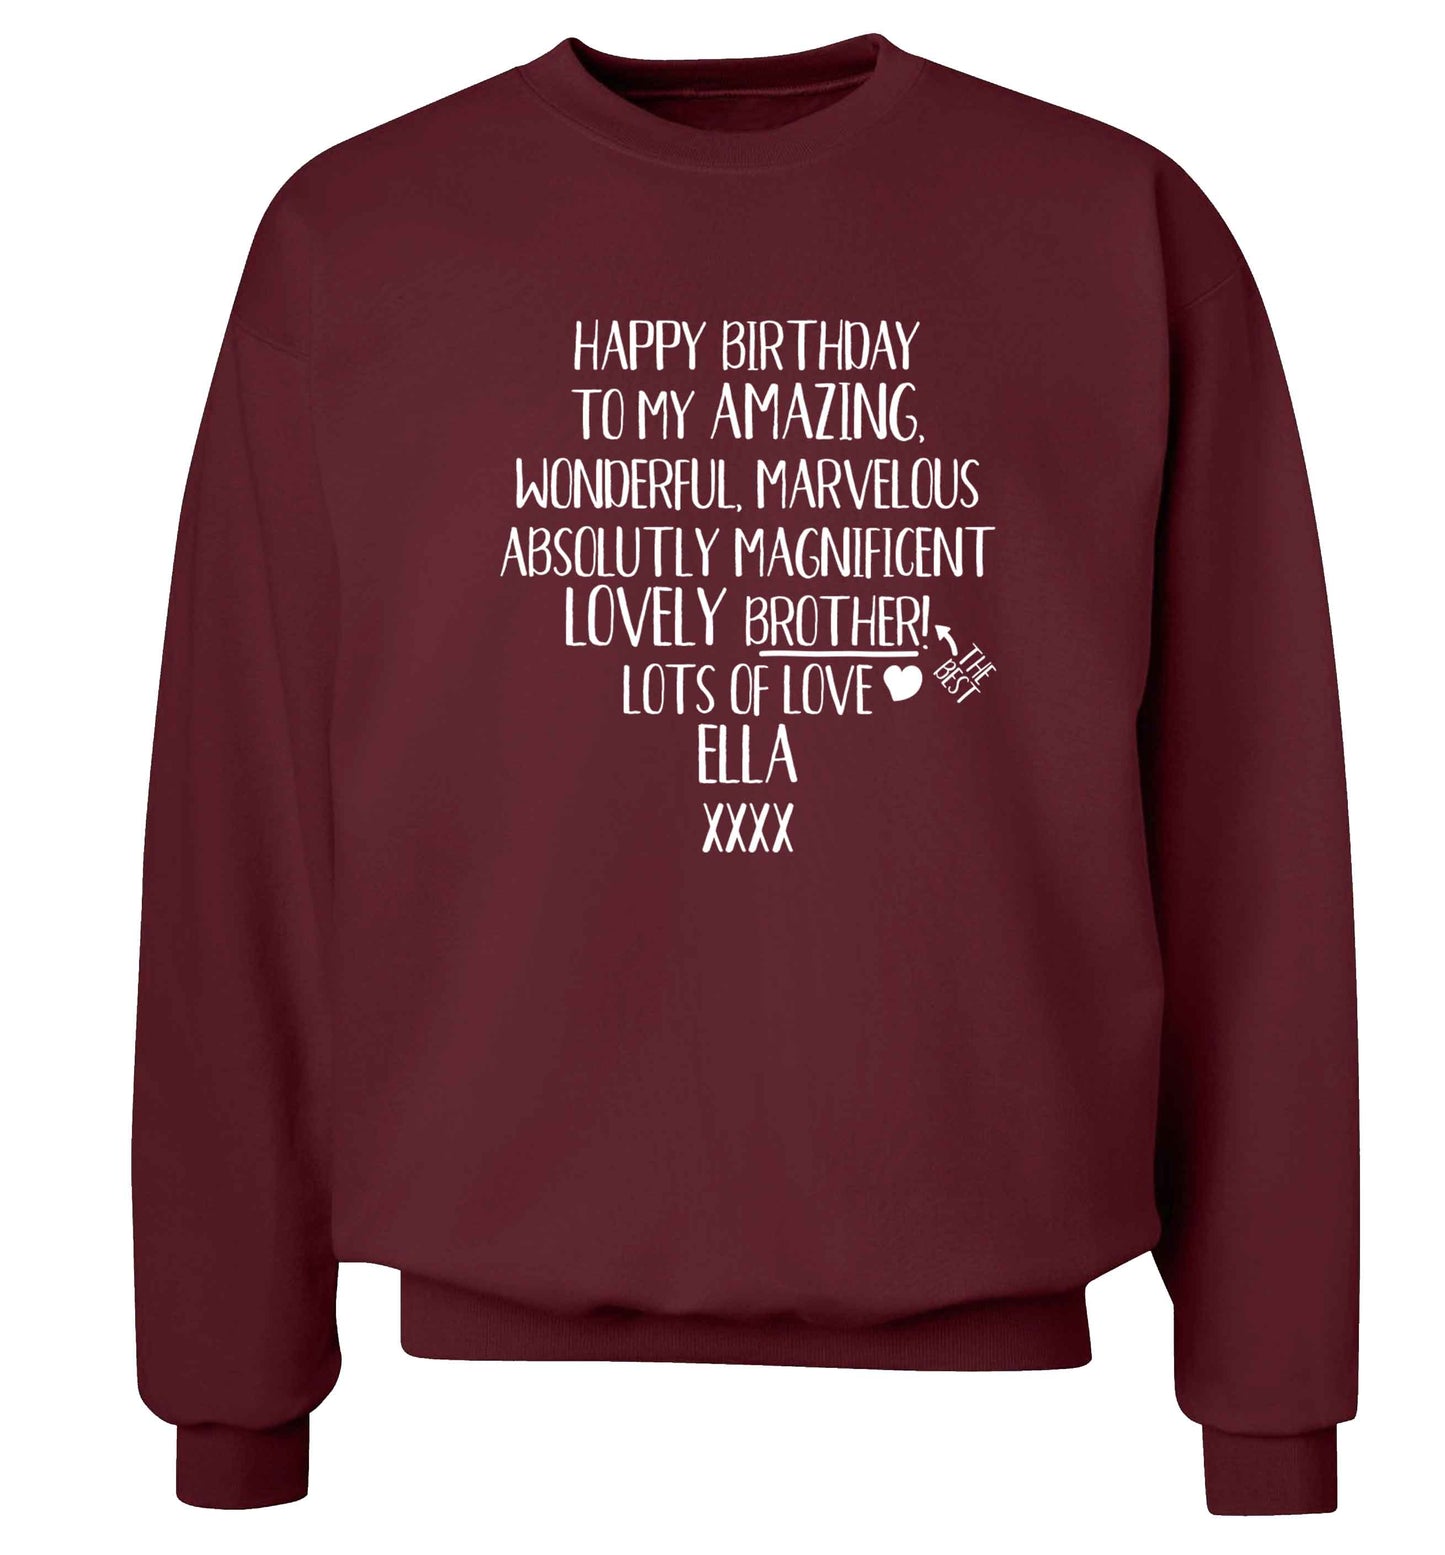 Personalised happy birthday to my amazing, wonderful, lovely brother Adult's unisex maroon Sweater 2XL